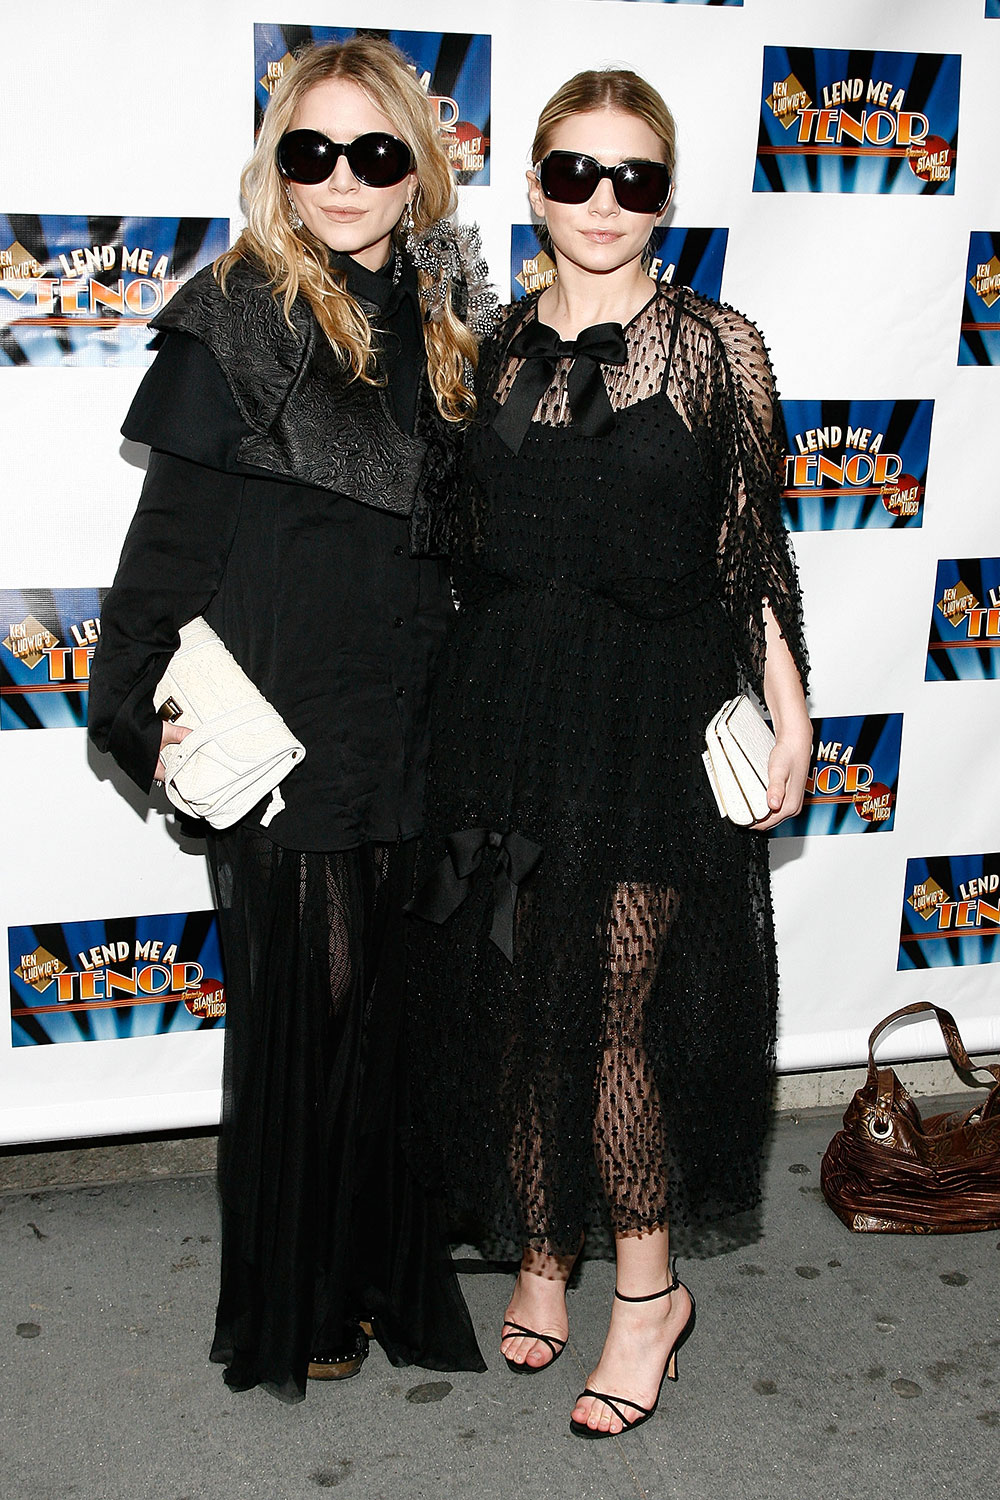 Mary-Kate and Ashley Olsen at the opening night of 'Lend Me A Tenor' on Broadway in 2010